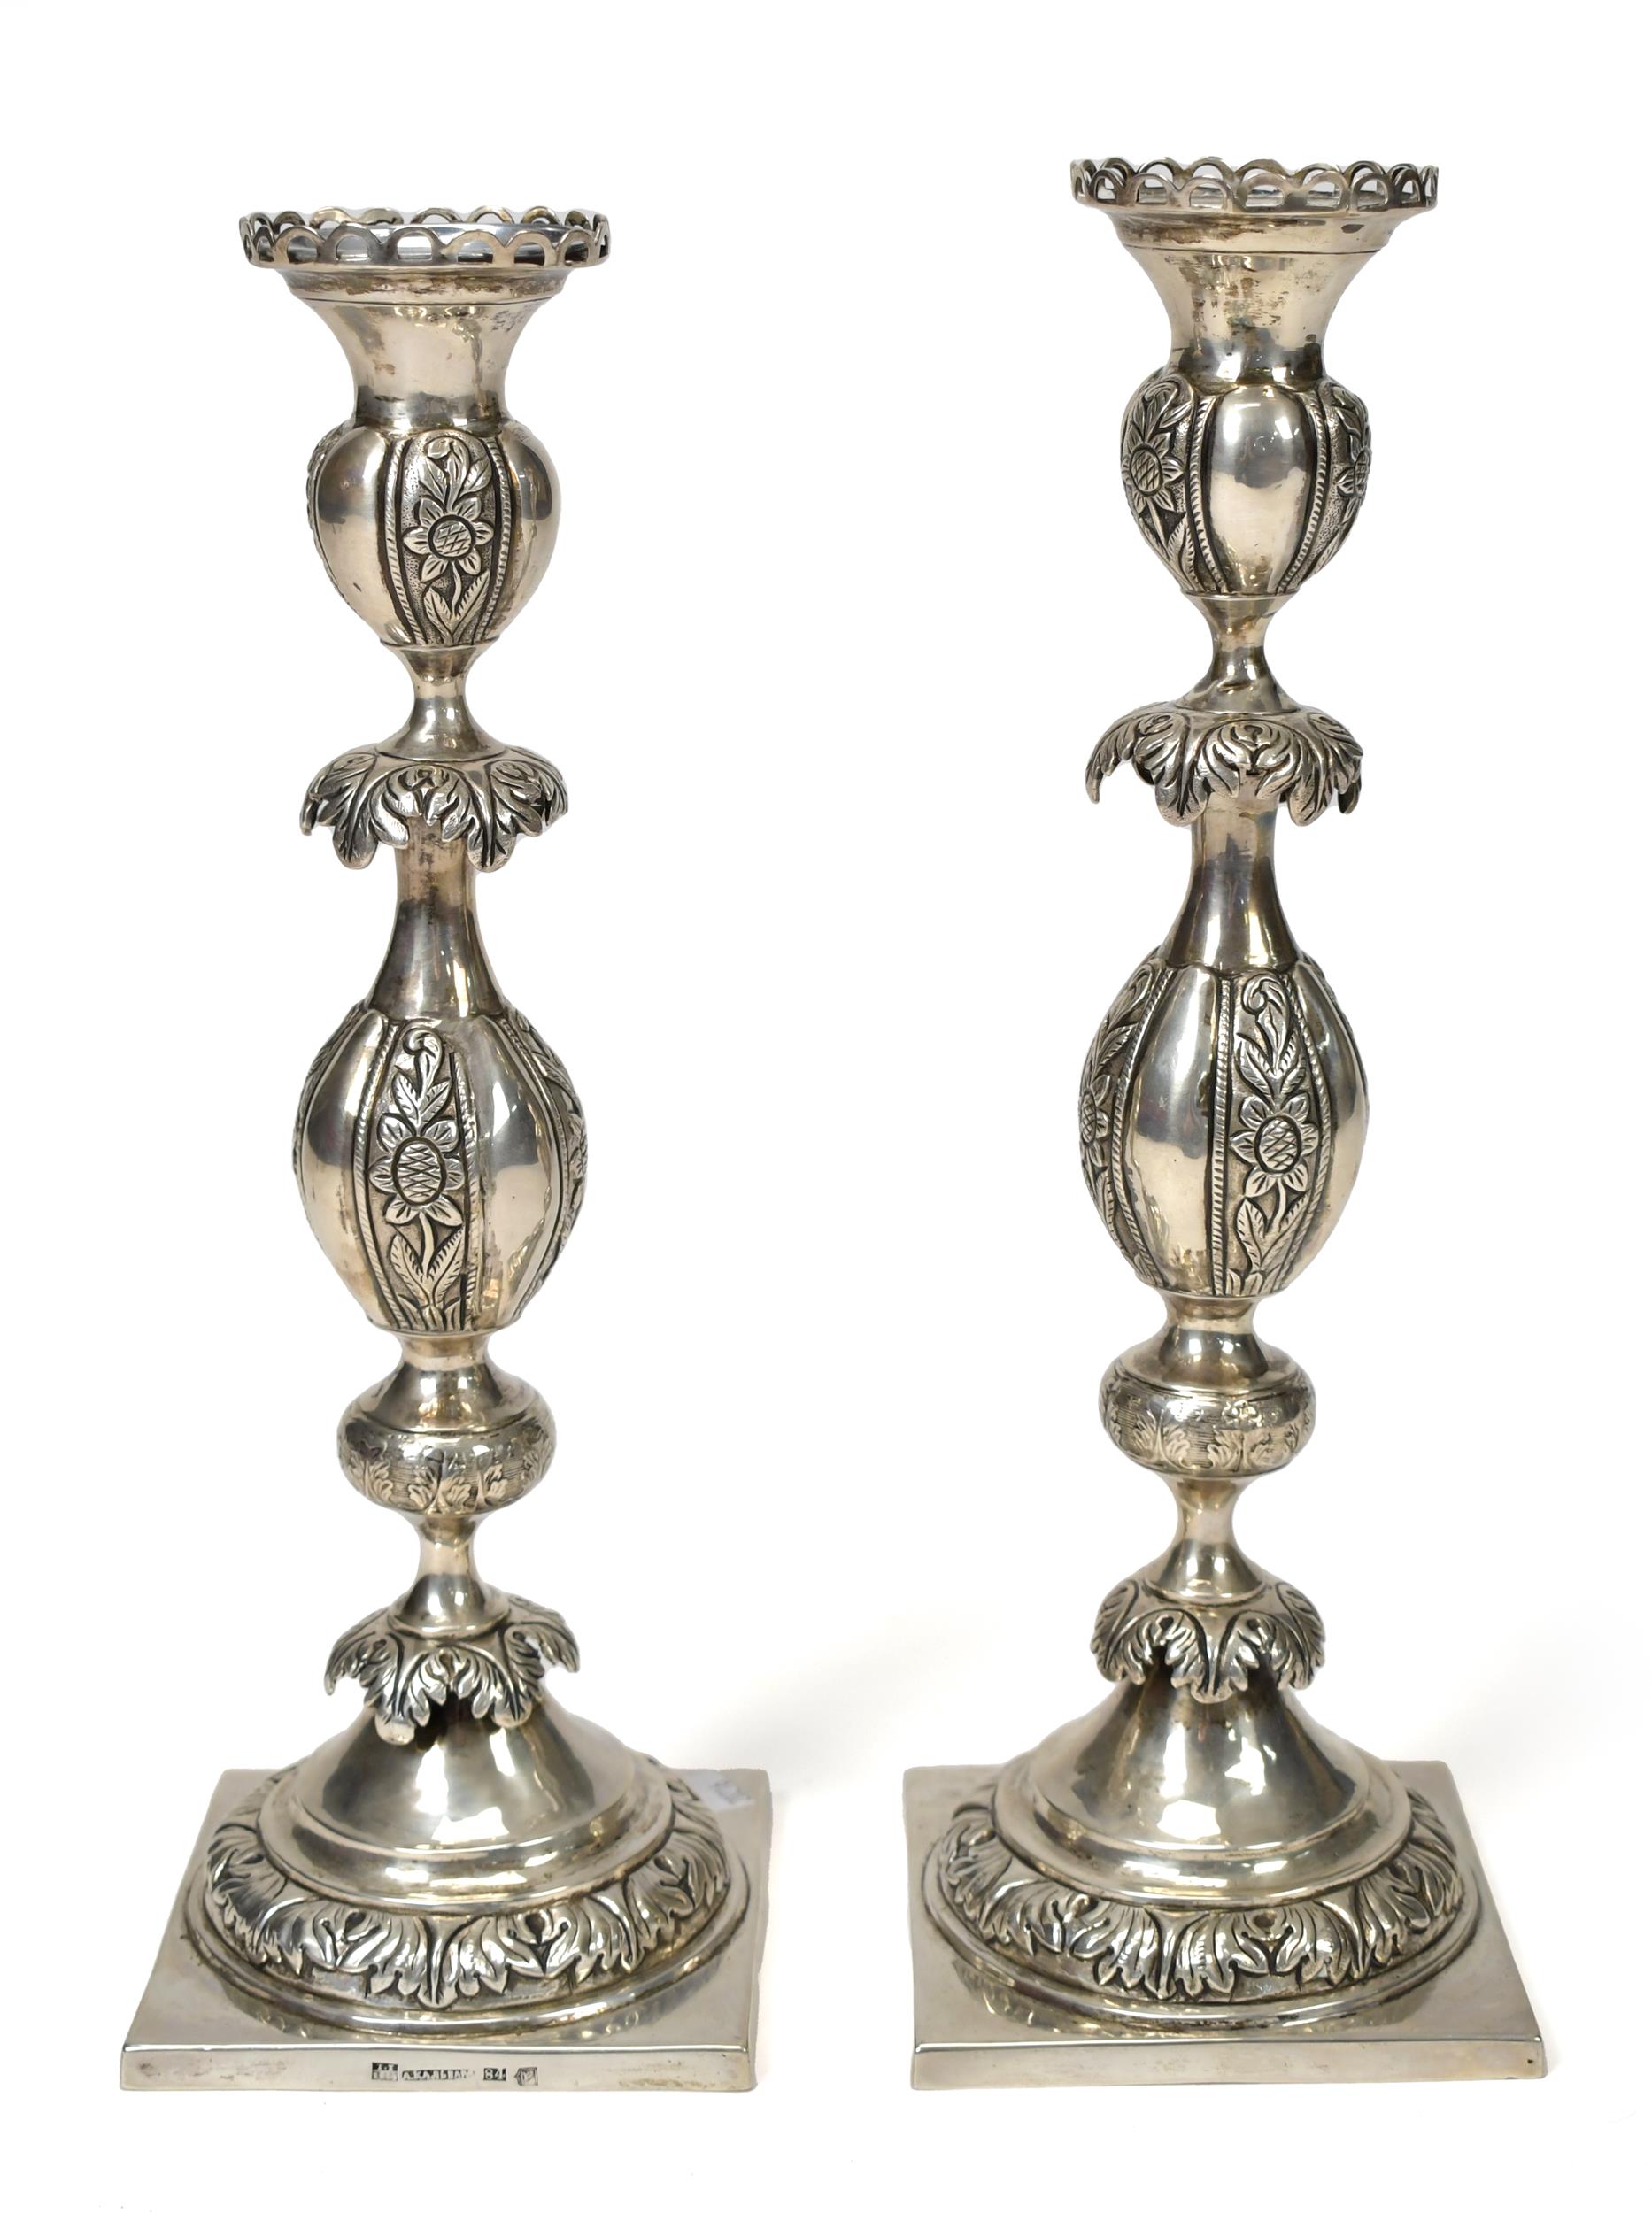 PAIR OF RUSSIAN SILVER CANDLESTICKS.